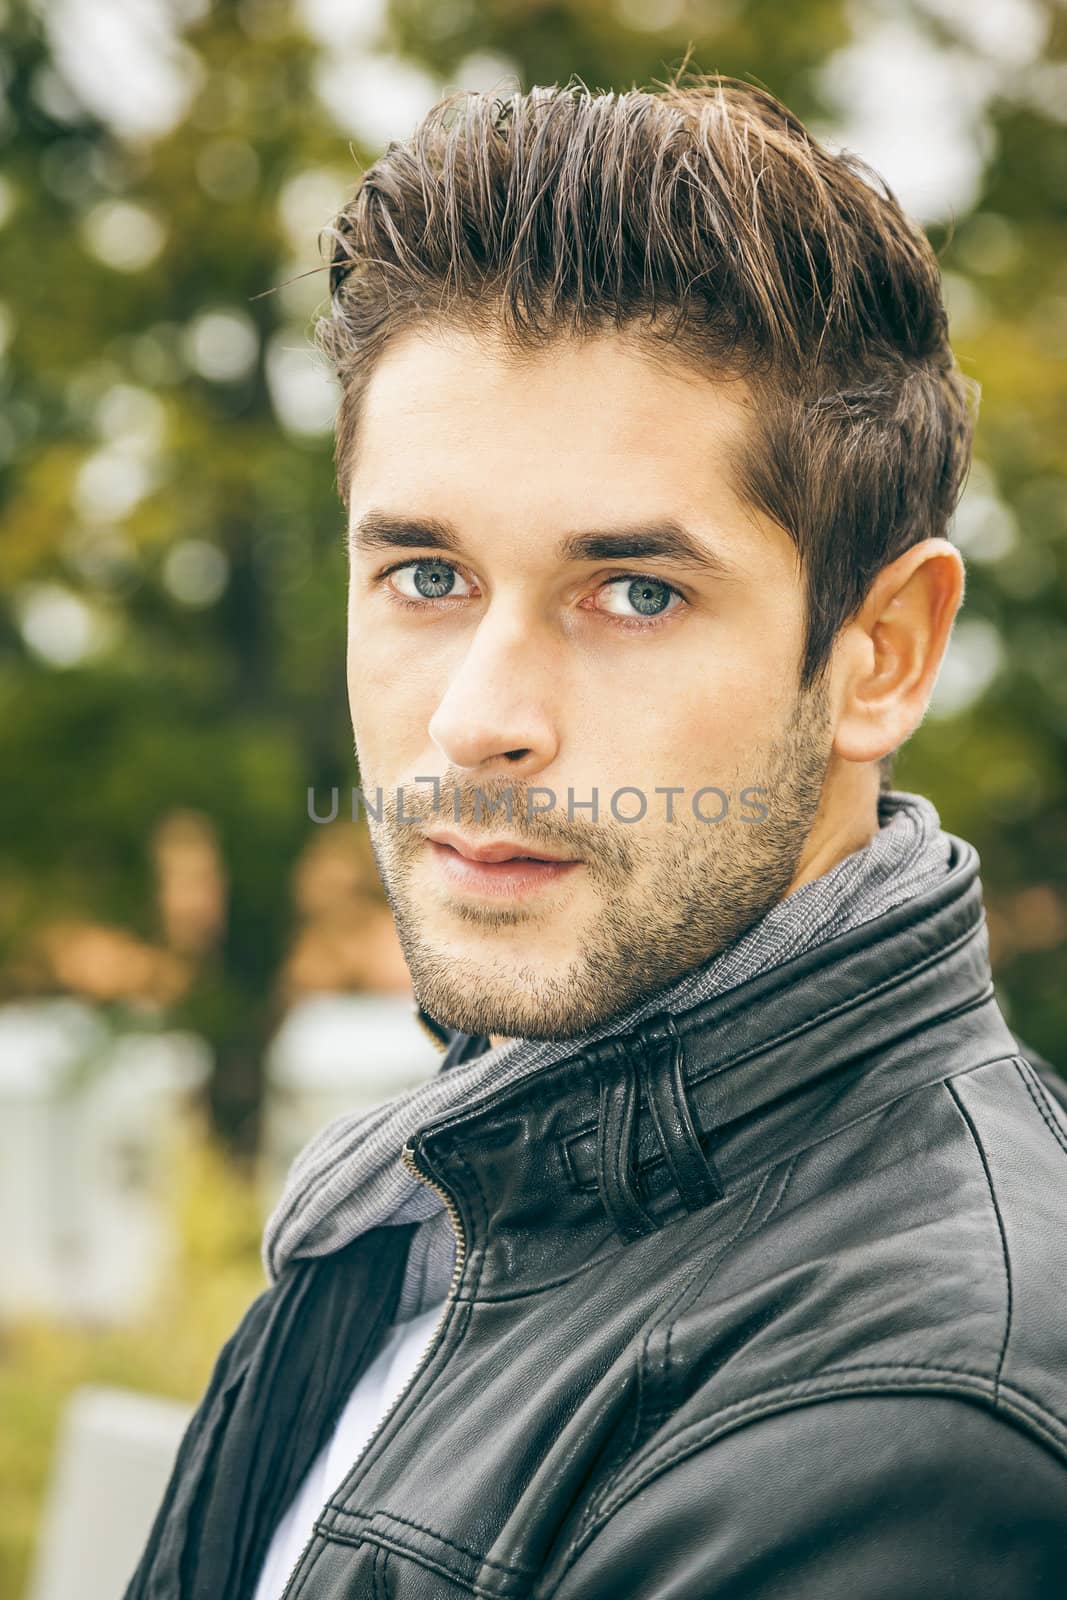 An image of a young man with a black leather jacket